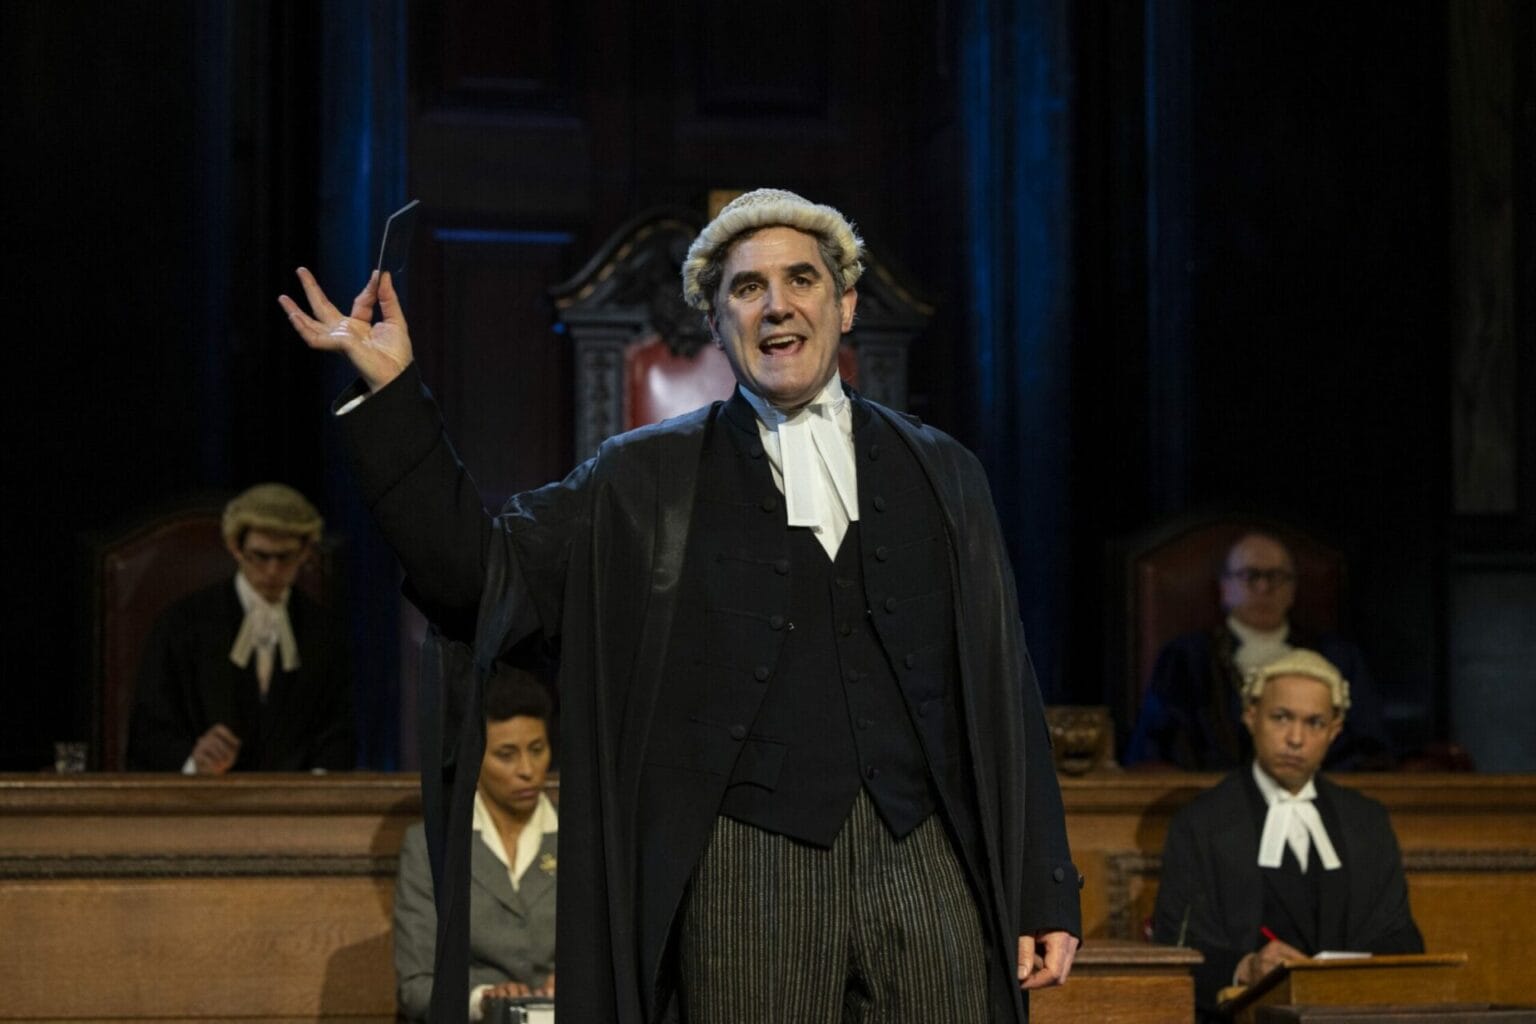 Witness for the Prosecution Taken on 29th March 2022, London